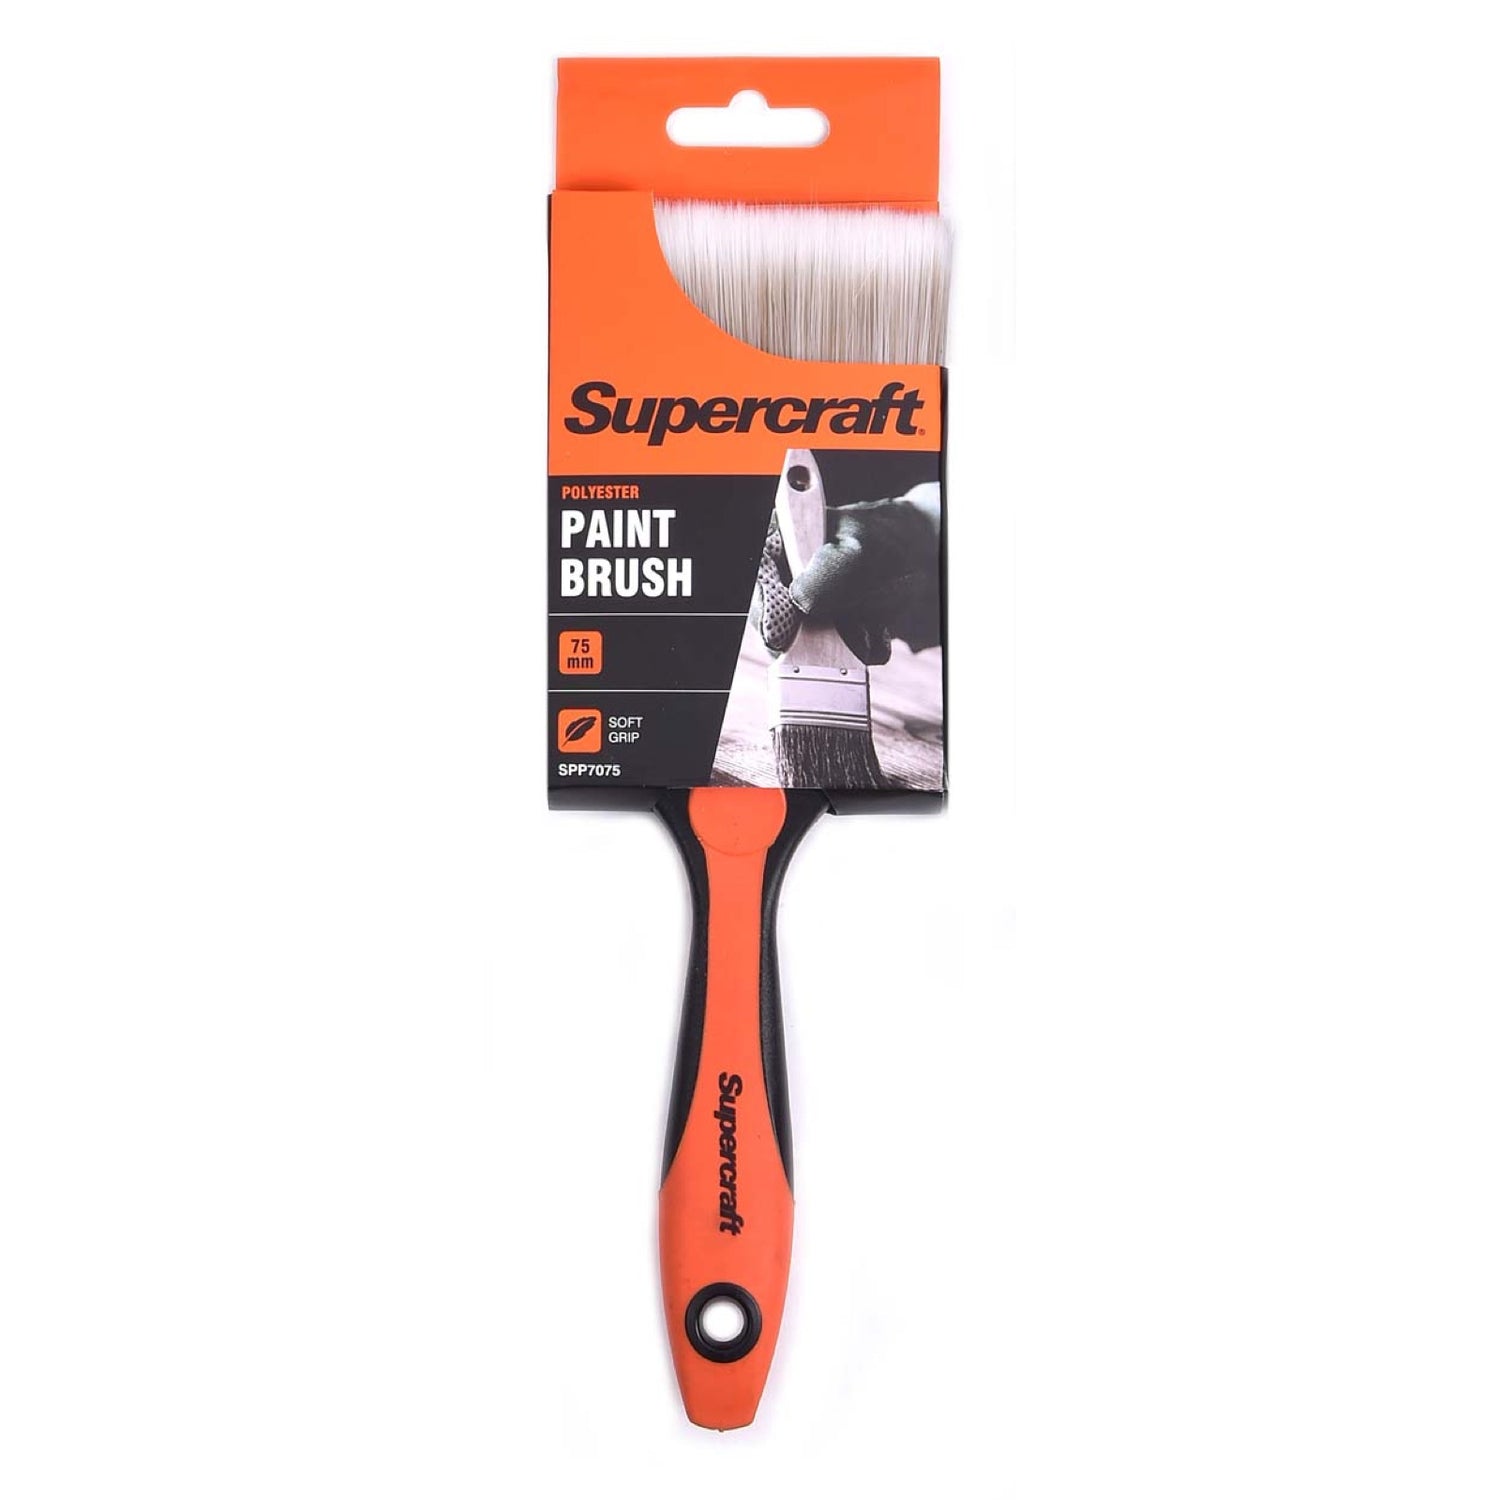 Supercraft Paint Brush Soft Grip 75mm Synthetic